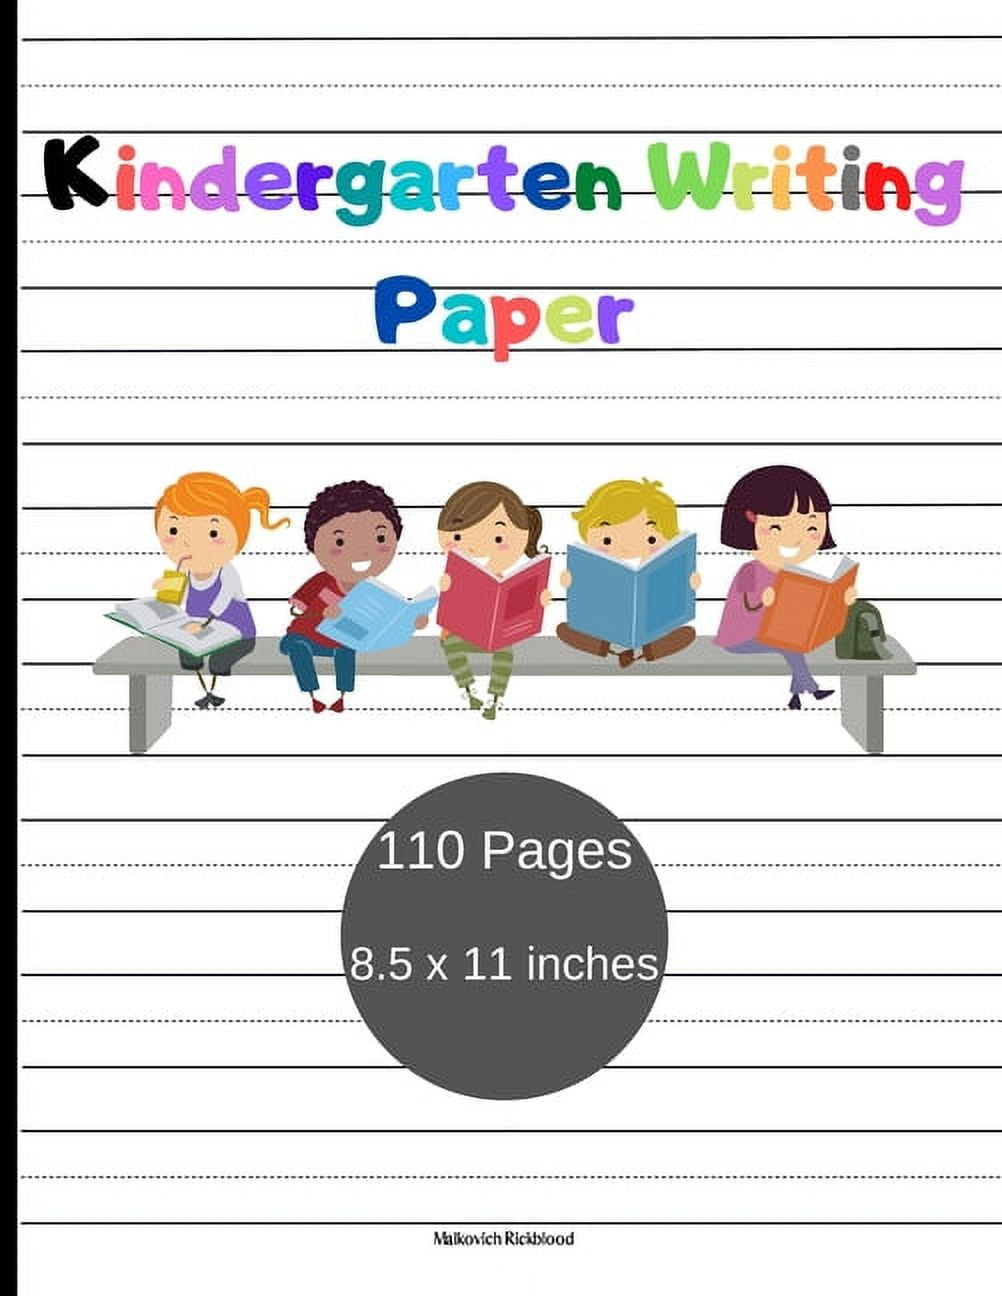 Writing Paper For Kindergarten: Handwriting Printing Practice Writing Paper  for Kids (Composition Notebook Dotted Line)